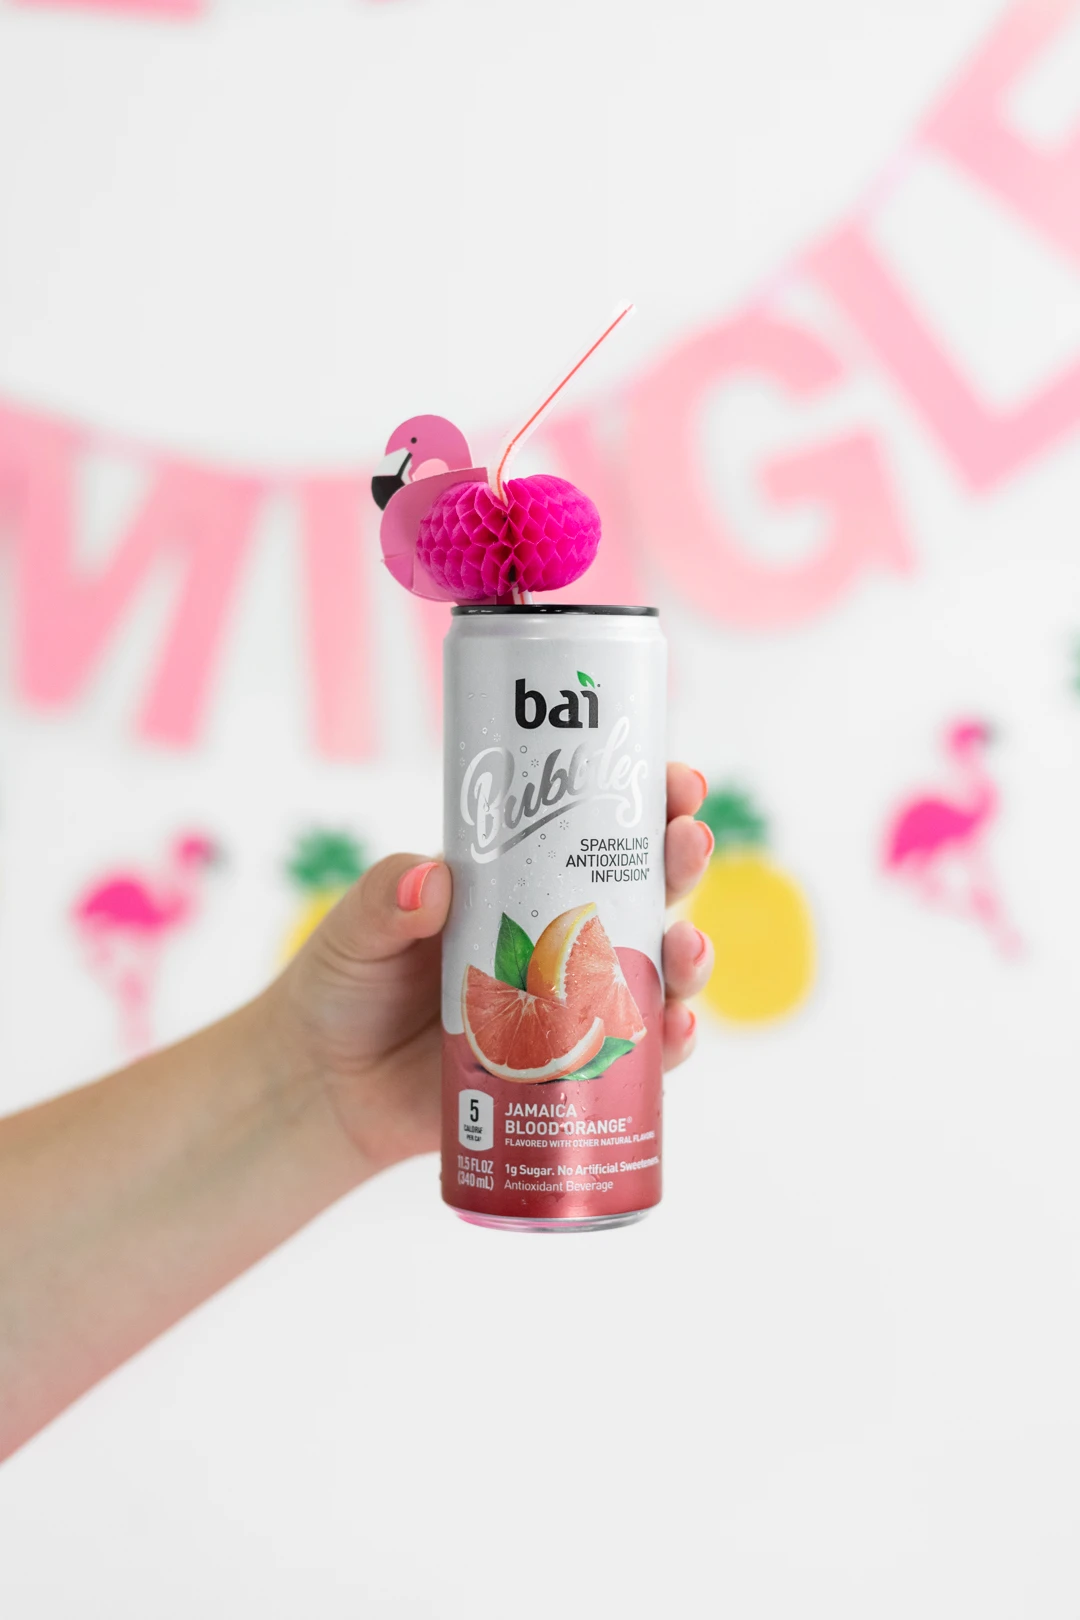 Flamingo Themed Party for Summer featuring Bai Bubbles.